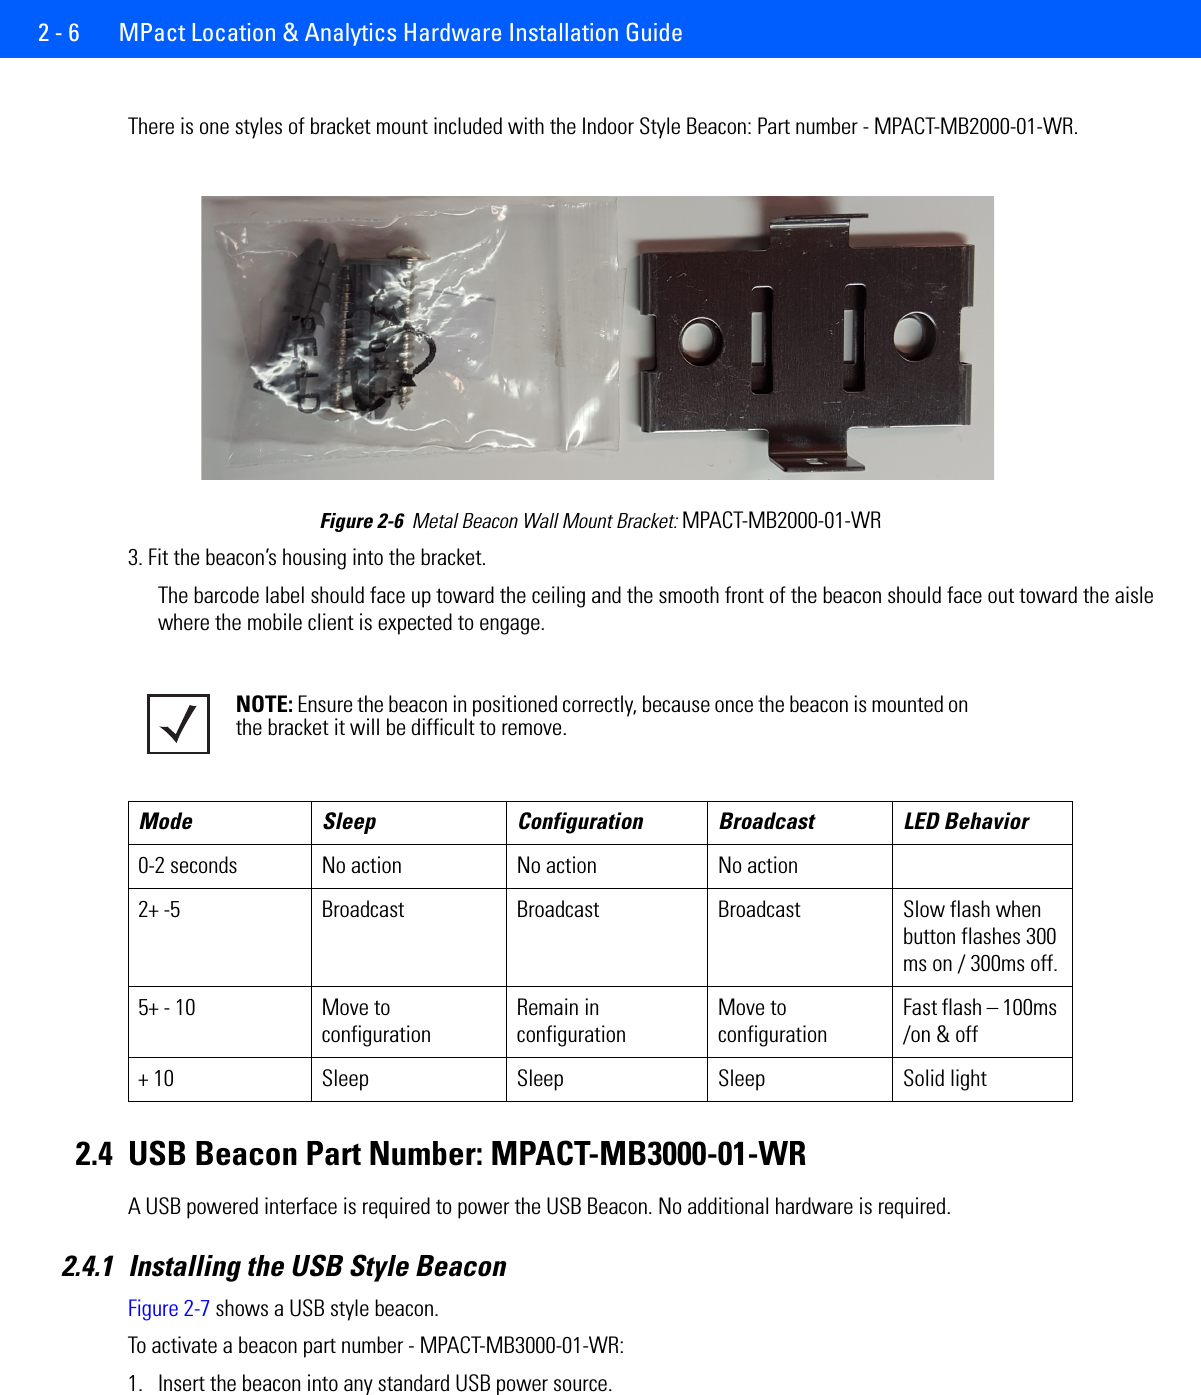 2 - 6  MPact Location &amp; Analytics Hardware Installation GuideThere is one styles of bracket mount included with the Indoor Style Beacon: Part number - MPACT-MB2000-01-WR.Figure 2-6  Metal Beacon Wall Mount Bracket: MPACT-MB2000-01-WR3. Fit the beacon’s housing into the bracket.The barcode label should face up toward the ceiling and the smooth front of the beacon should face out toward the aisle where the mobile client is expected to engage. 2.4 USB Beacon Part Number: MPACT-MB3000-01-WRA USB powered interface is required to power the USB Beacon. No additional hardware is required.2.4.1 Installing the USB Style BeaconFigure 2-7 shows a USB style beacon. To activate a beacon part number - MPACT-MB3000-01-WR: 1. Insert the beacon into any standard USB power source.NOTE: Ensure the beacon in positioned correctly, because once the beacon is mounted on the bracket it will be difficult to remove. Mode Sleep Configuration Broadcast LED Behavior0-2 seconds No action No action No action2+ -5 Broadcast Broadcast Broadcast Slow flash when button flashes 300 ms on / 300ms off.5+ - 10 Move to configurationRemain in configurationMove to configurationFast flash – 100ms /on &amp; off+ 10 Sleep Sleep Sleep Solid light